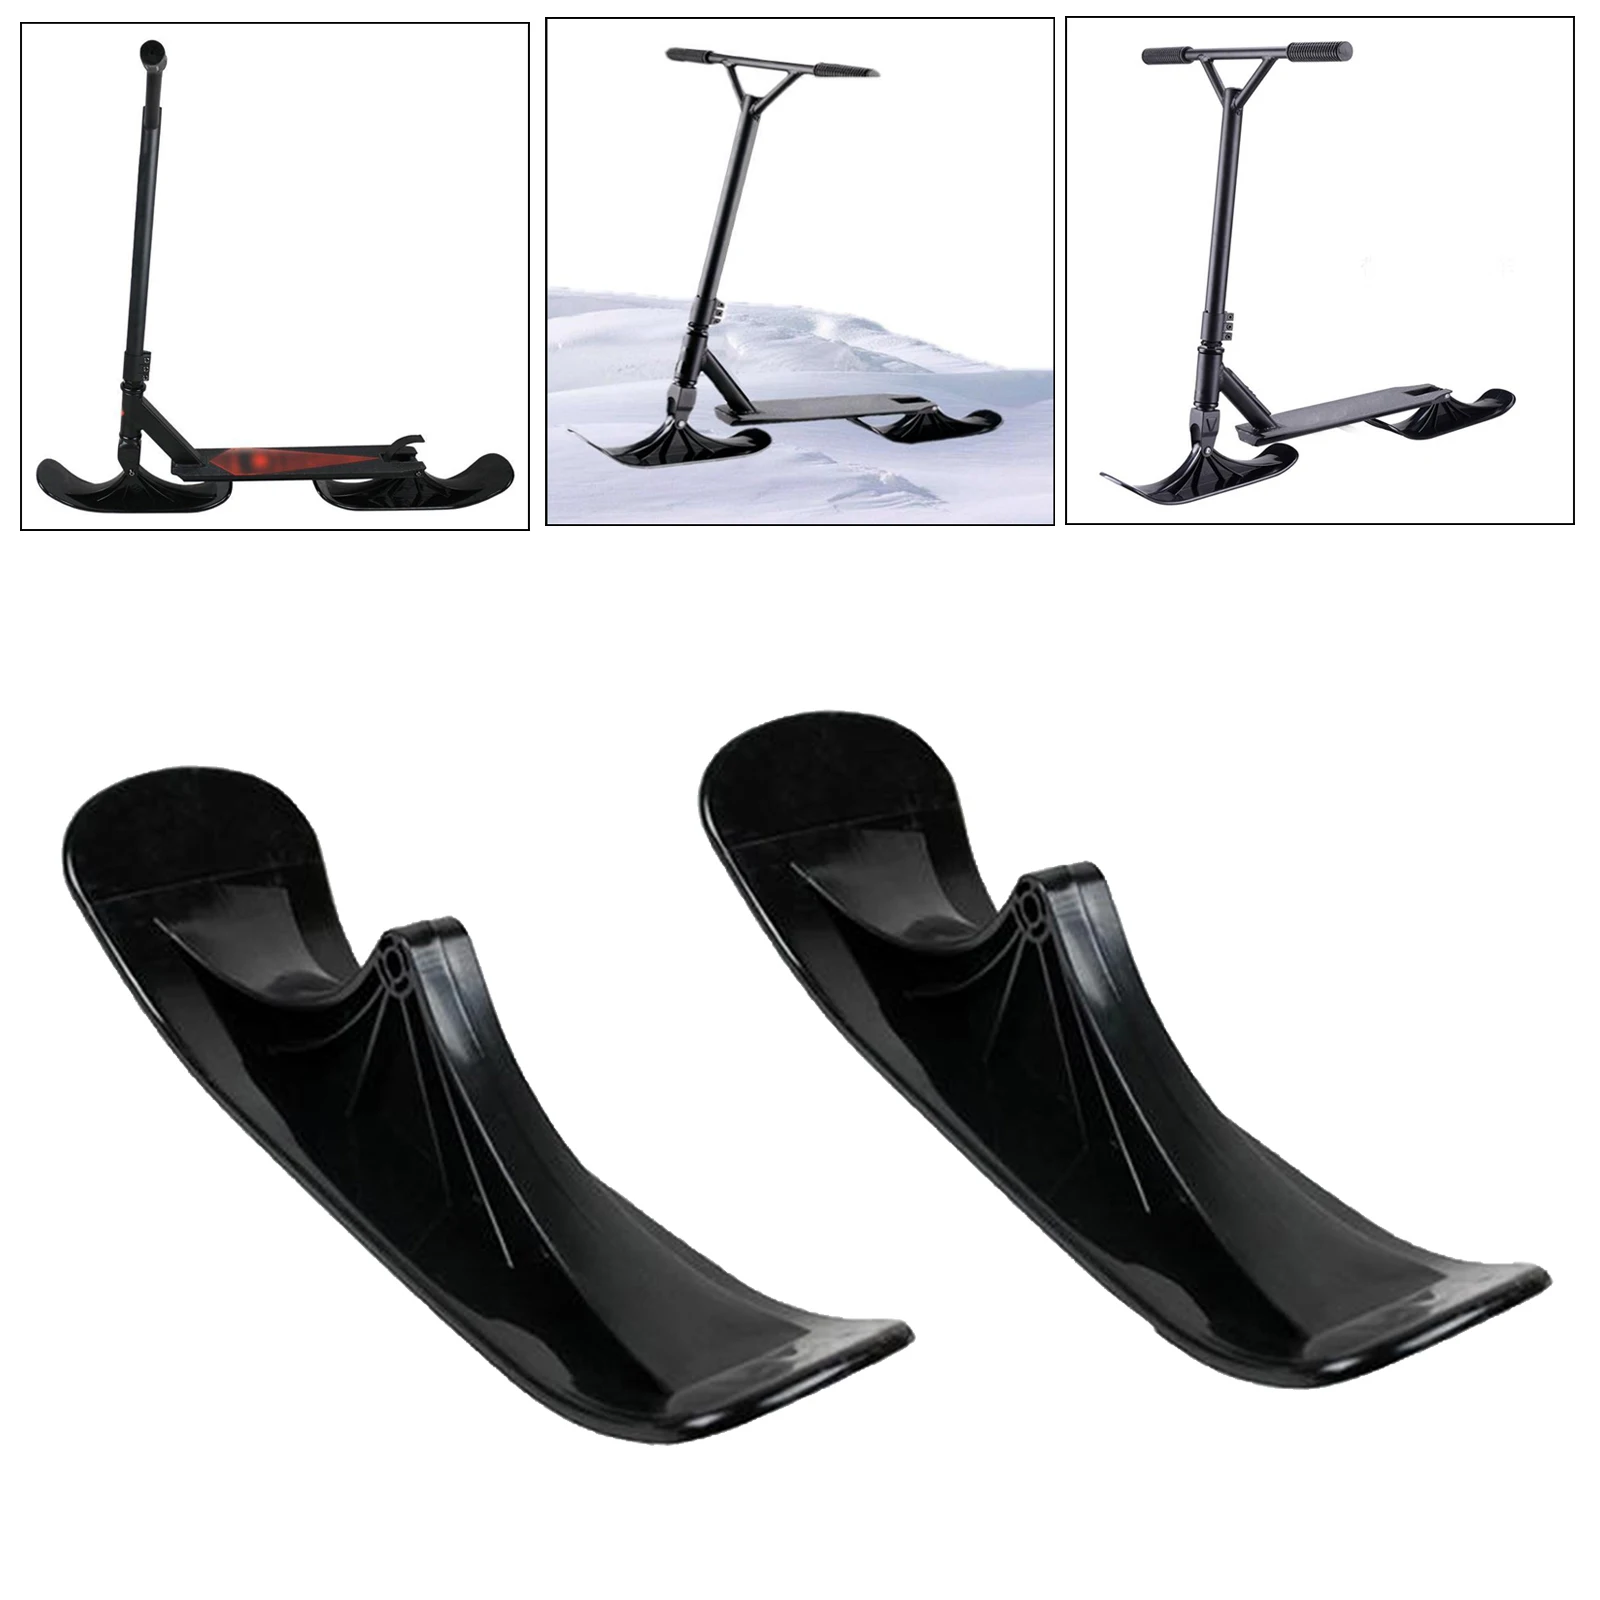 1 Pair Snow Sled Ski Scooter Kit,  Two-in-one Scooter Ski Board Snow Slider Toboggan Sled for Kids Outdoor Sports